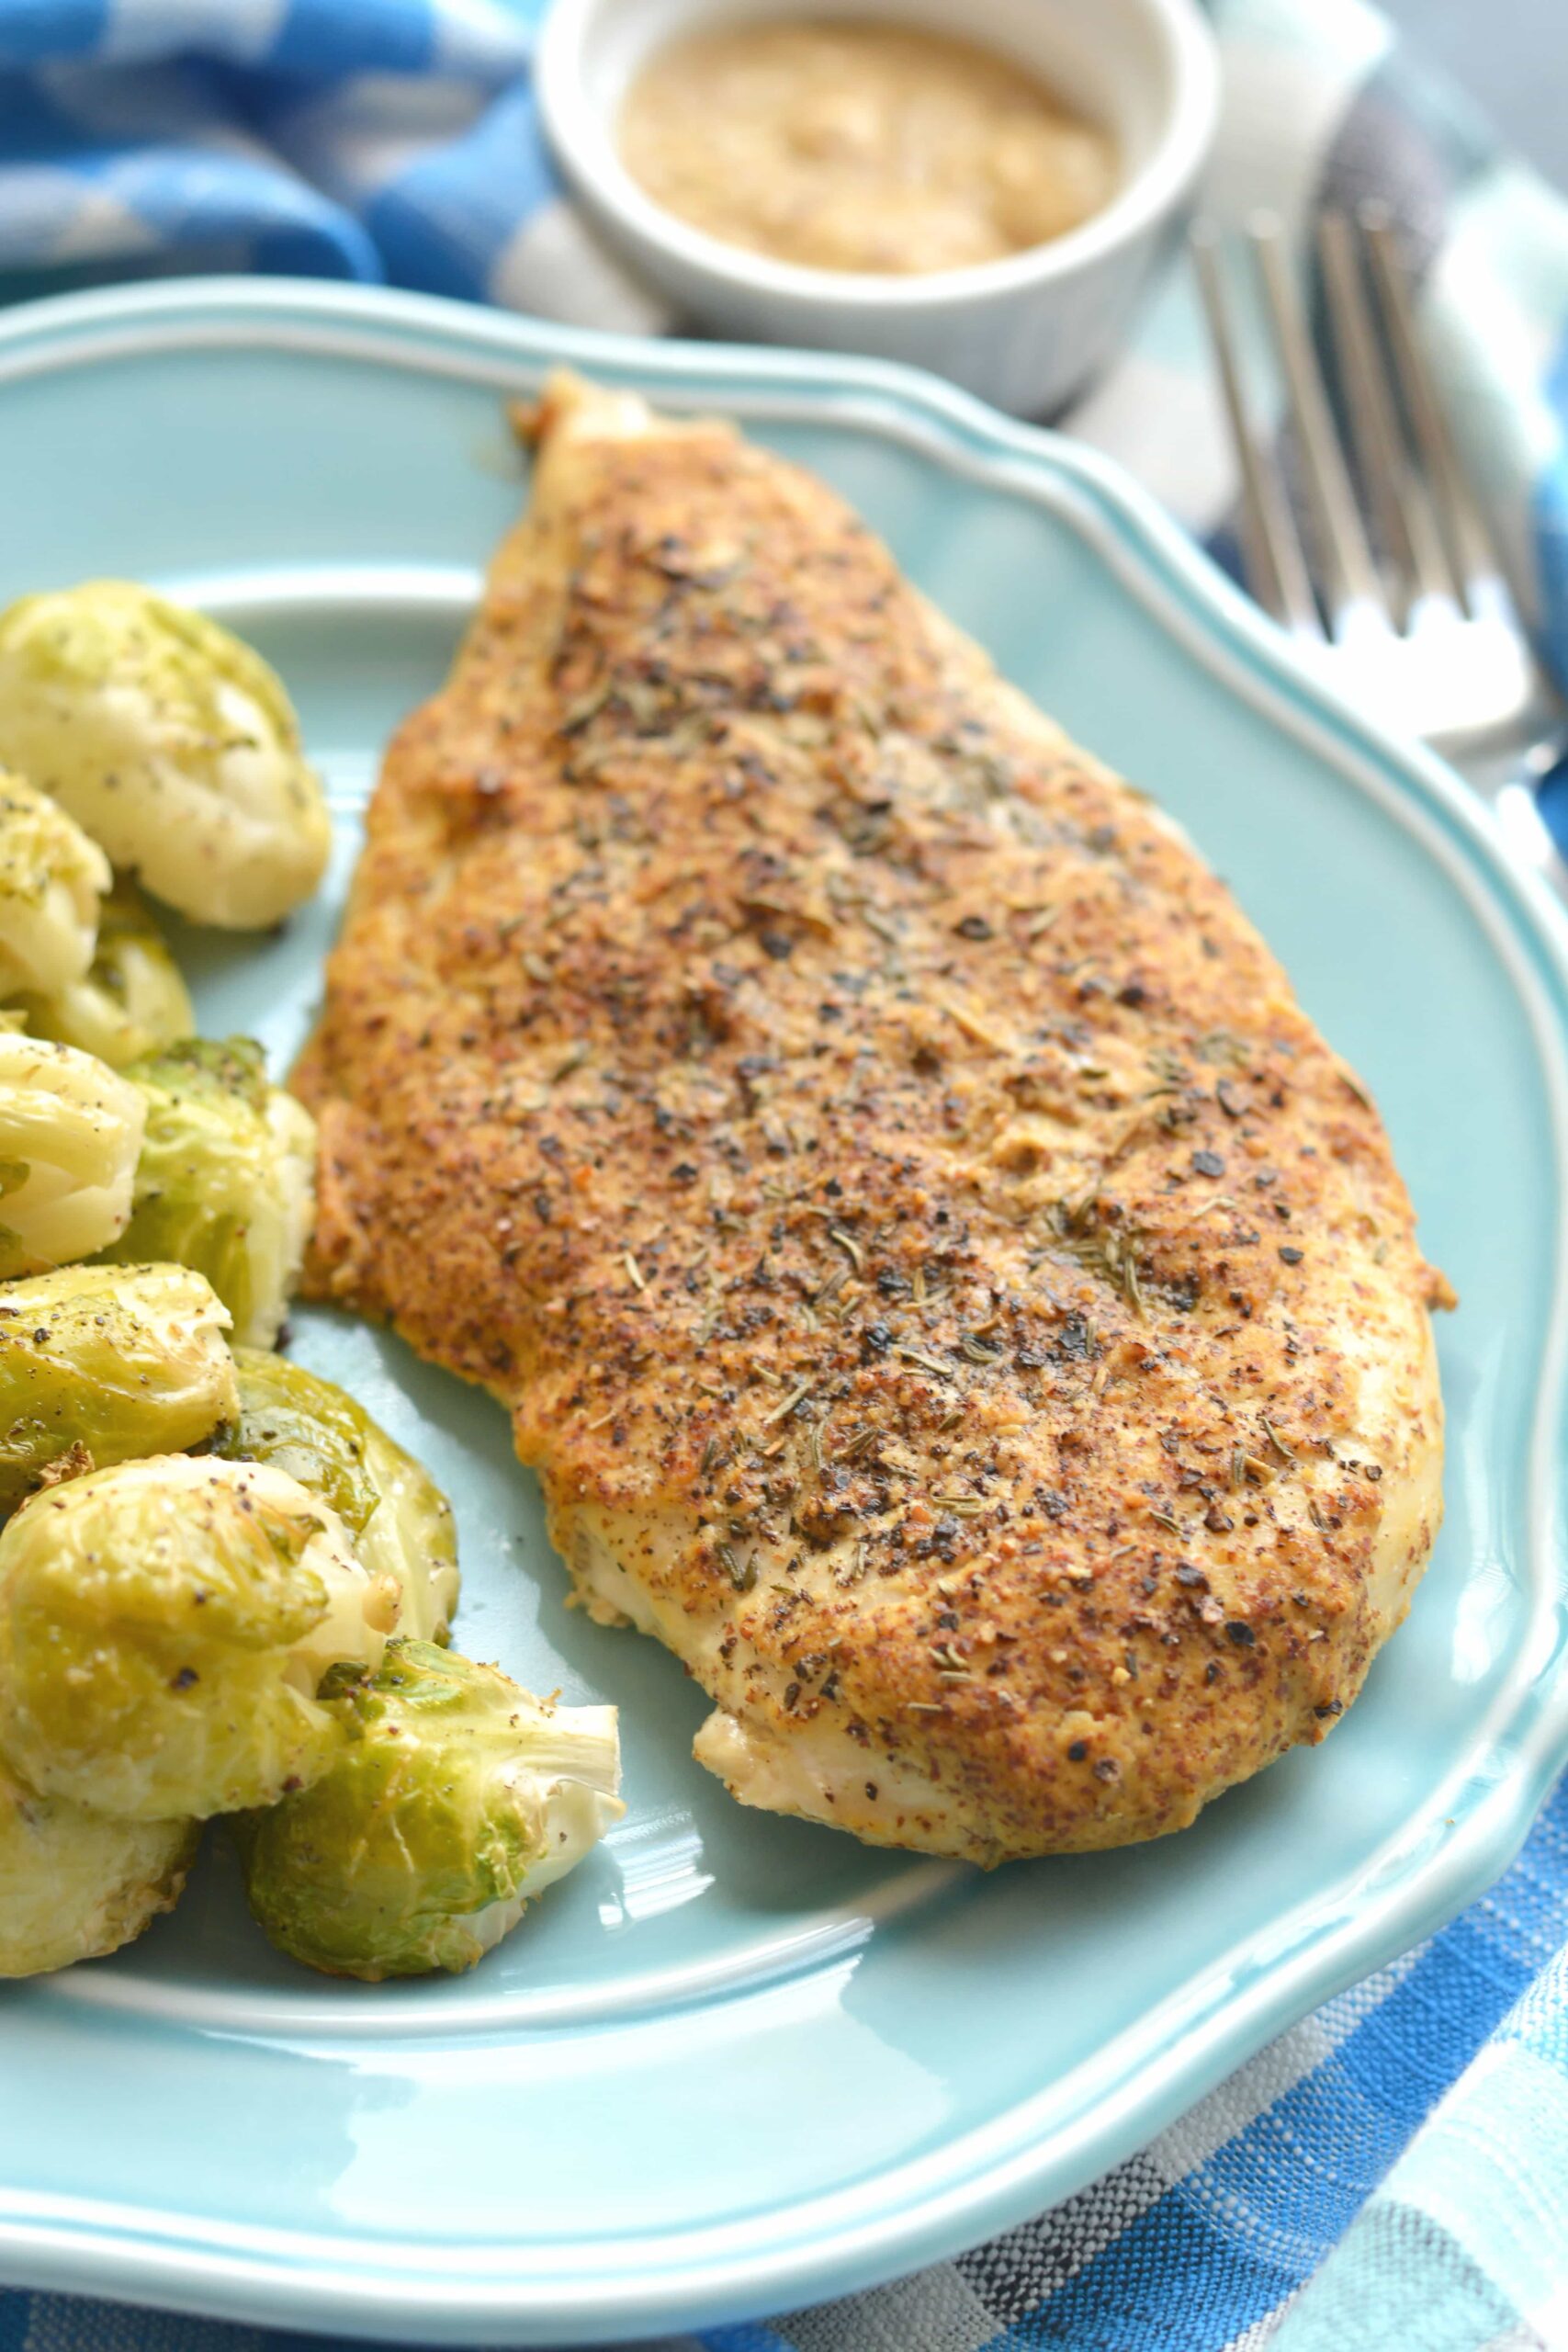 Spicy Mustard Thyme Chicken & Coconut Roasted Brussels Sprouts